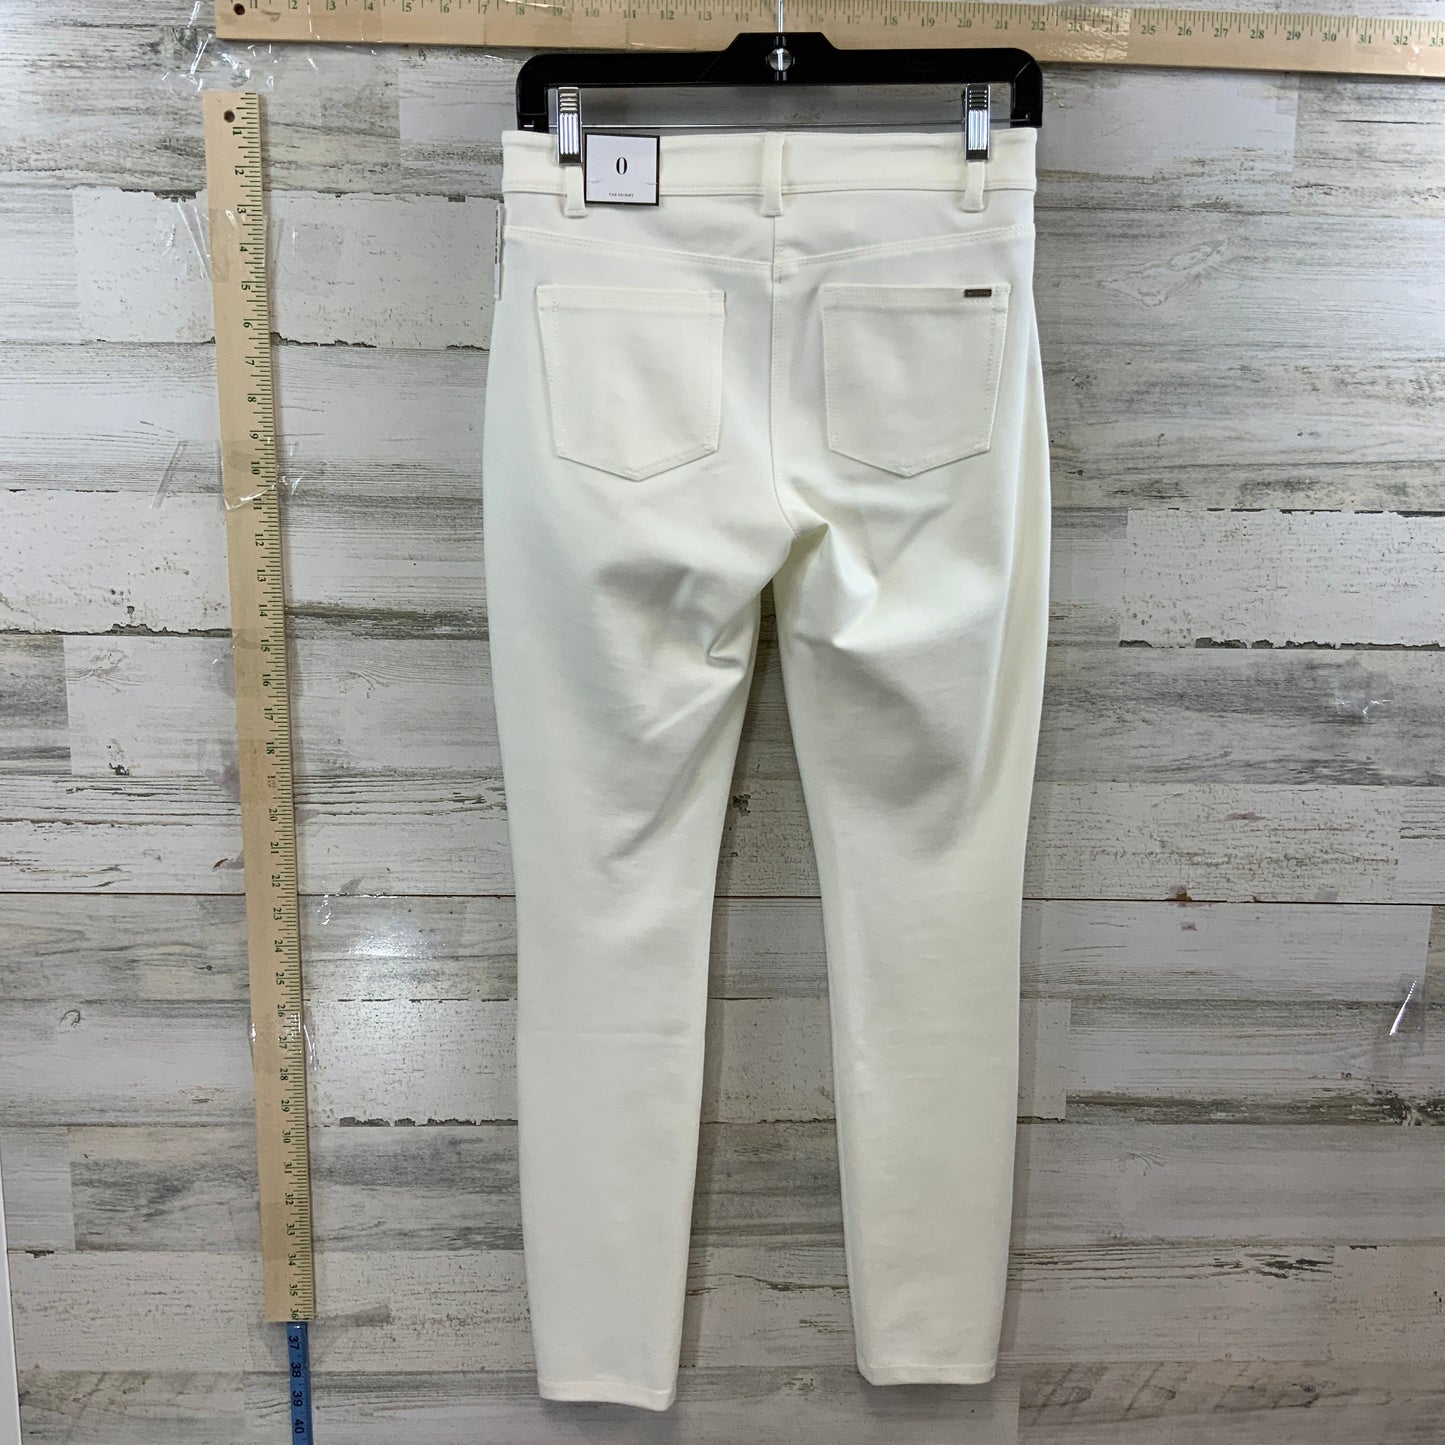 Pants Ankle By White House Black Market  Size: 0